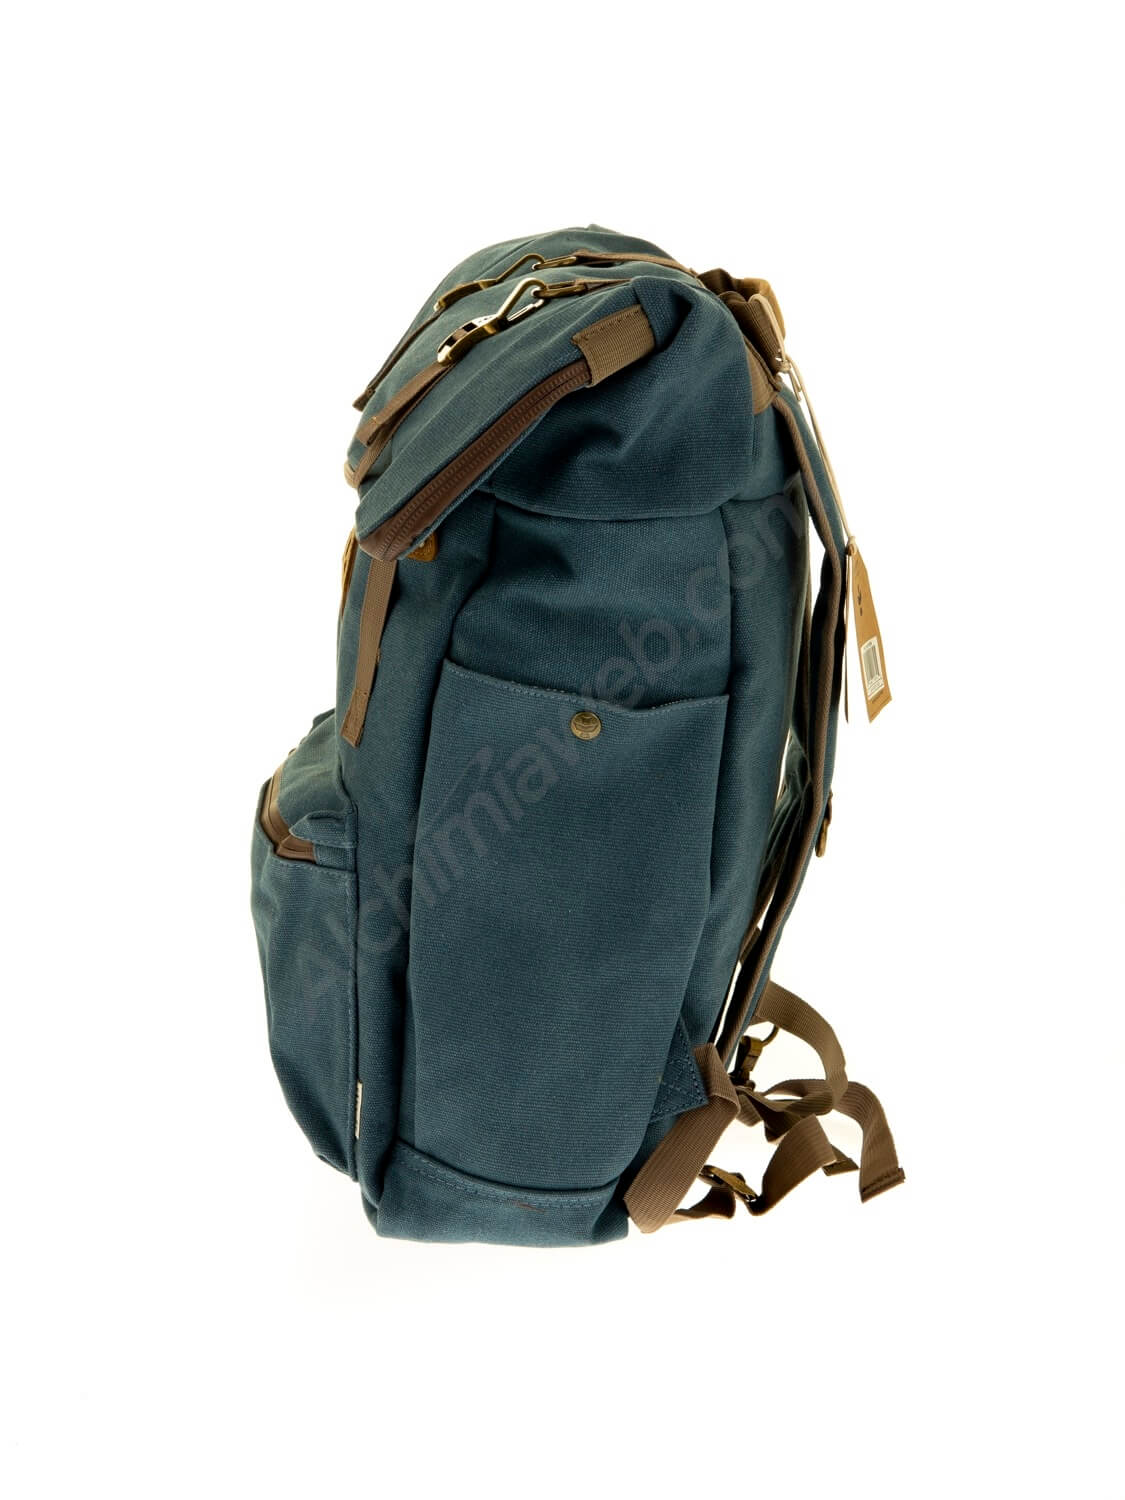 Sale of Anti-odour backpack Revelry The Drifter